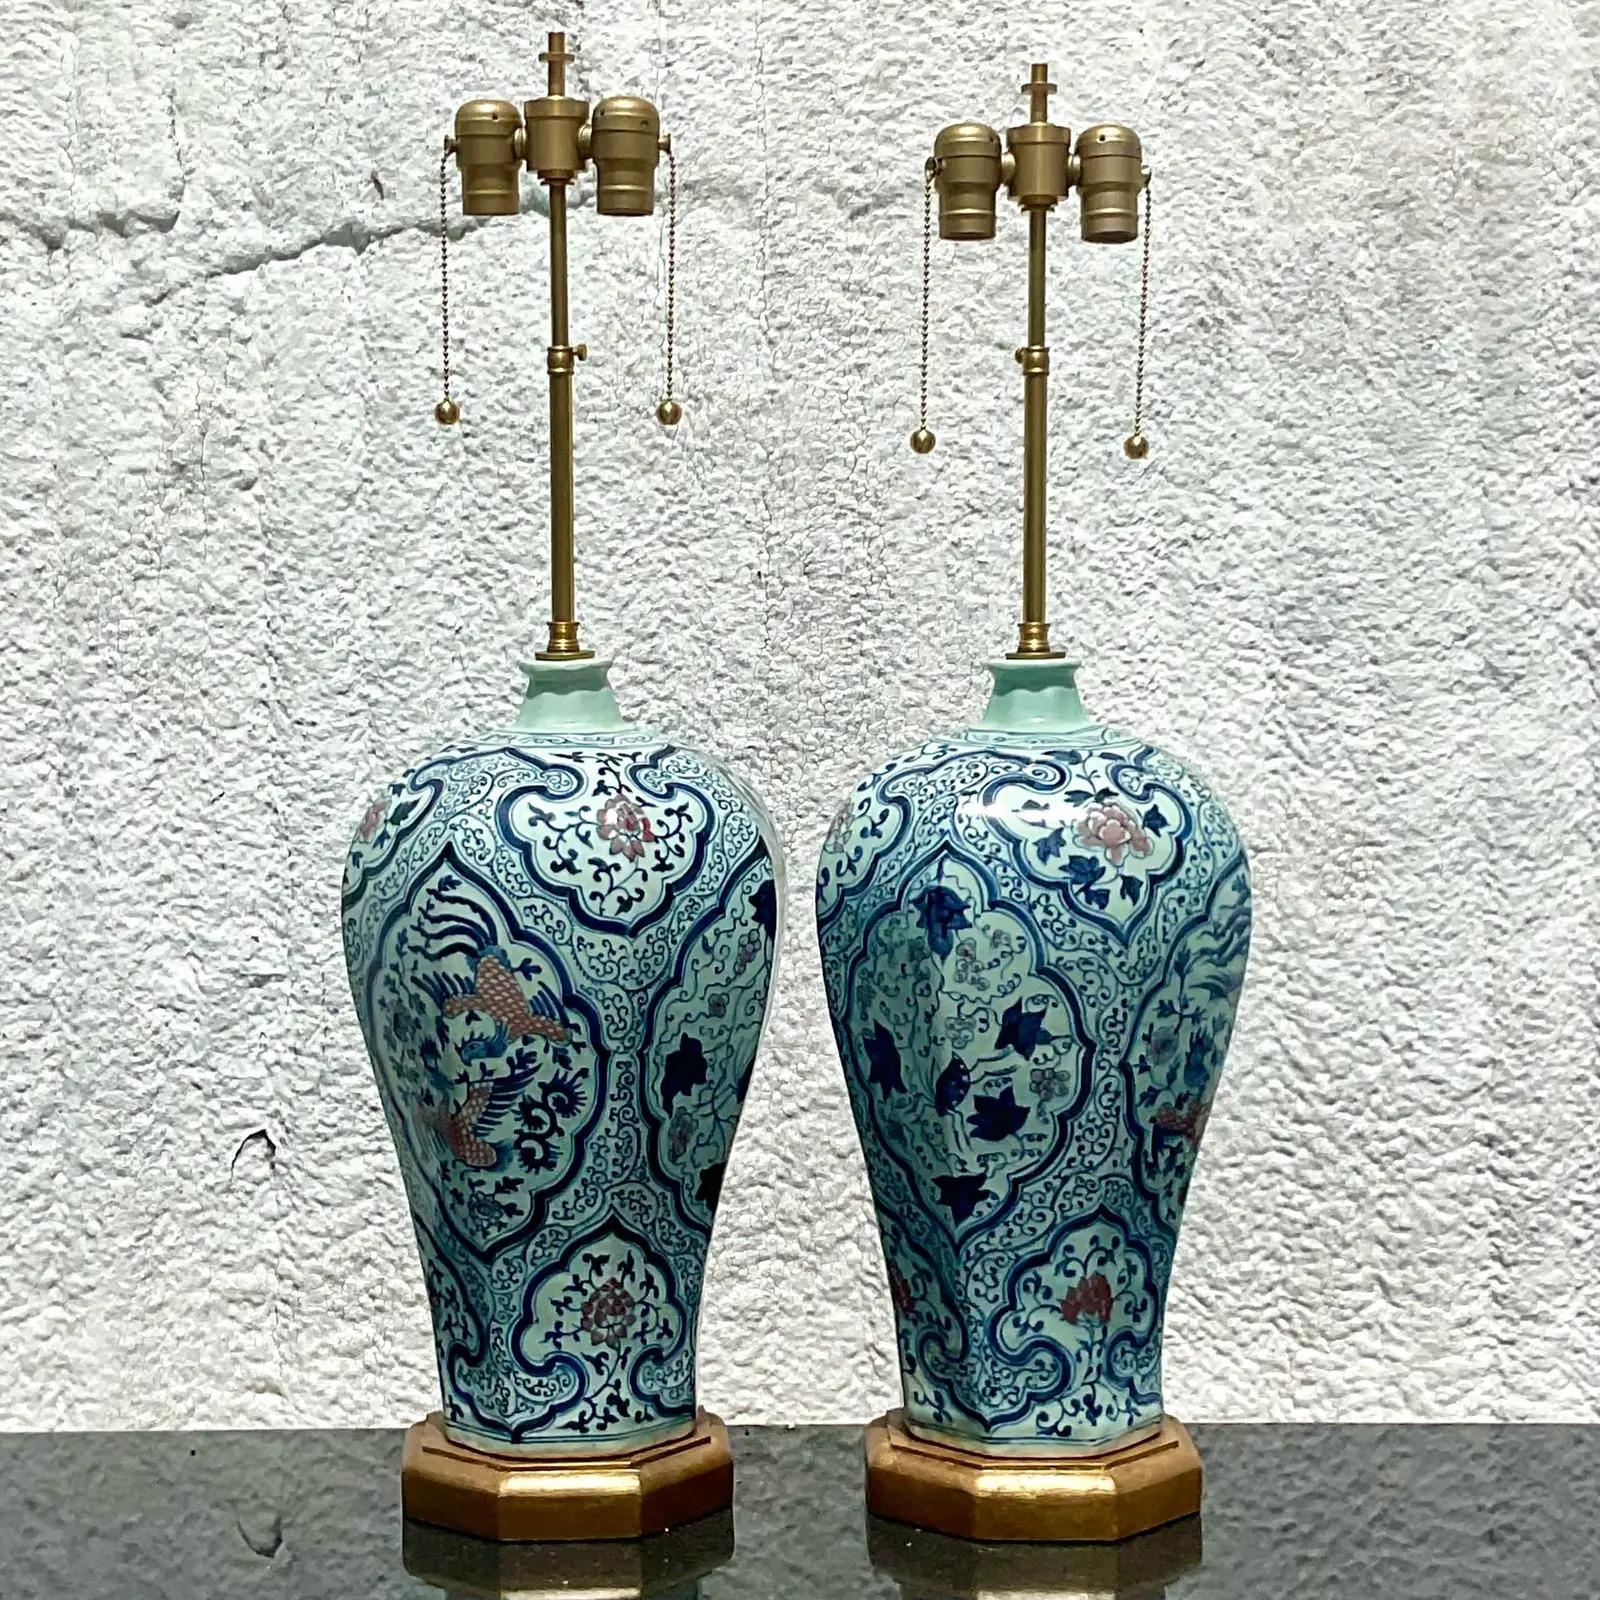 An amazing pair of vintage Asian table lamps. Beautiful and iconic blue and white design with small flashes of pale pink. Tall brushed brass hardware with a double socket. Acquired from a Palm Beach estate.